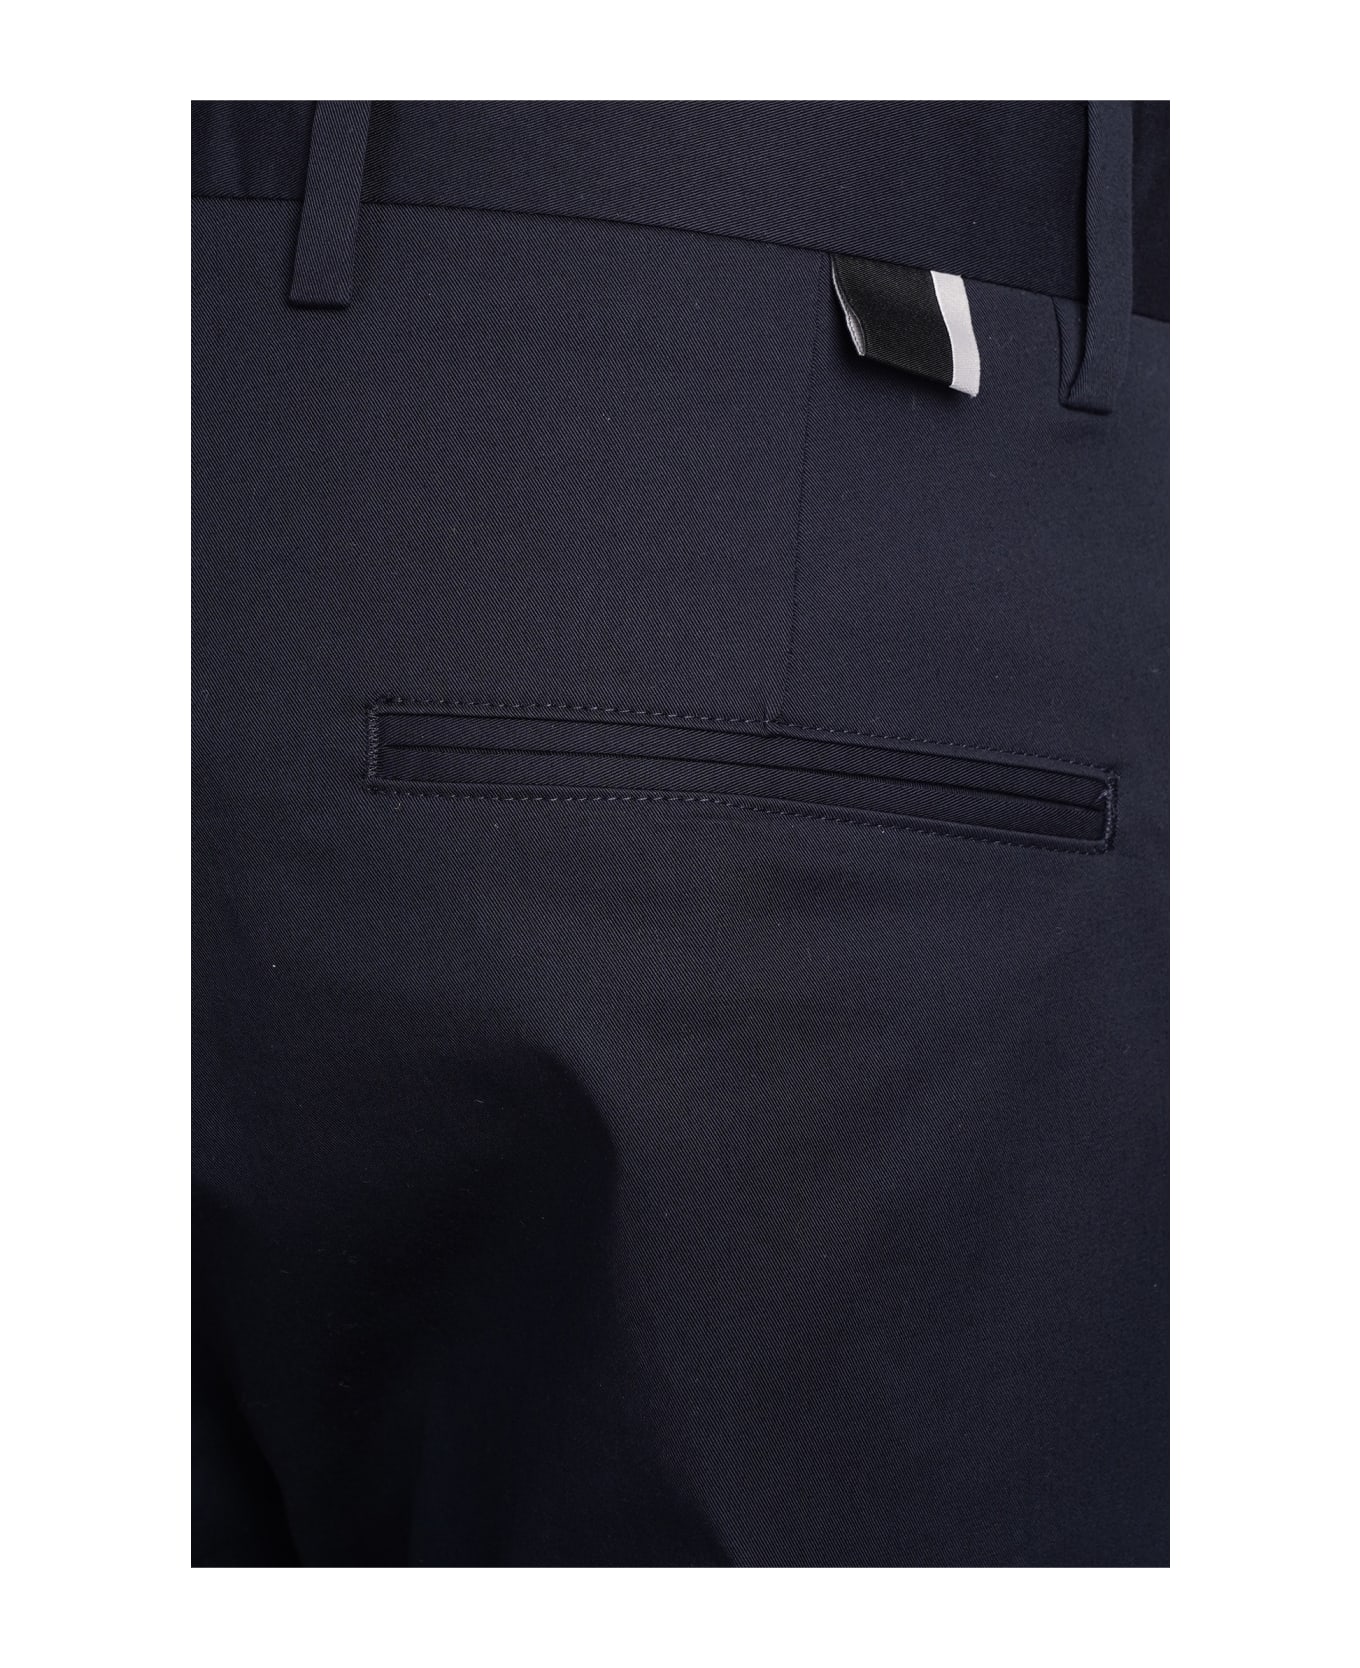 Low Brand Cooper T1.7 Pants In Blue Cotton - blue ボトムス